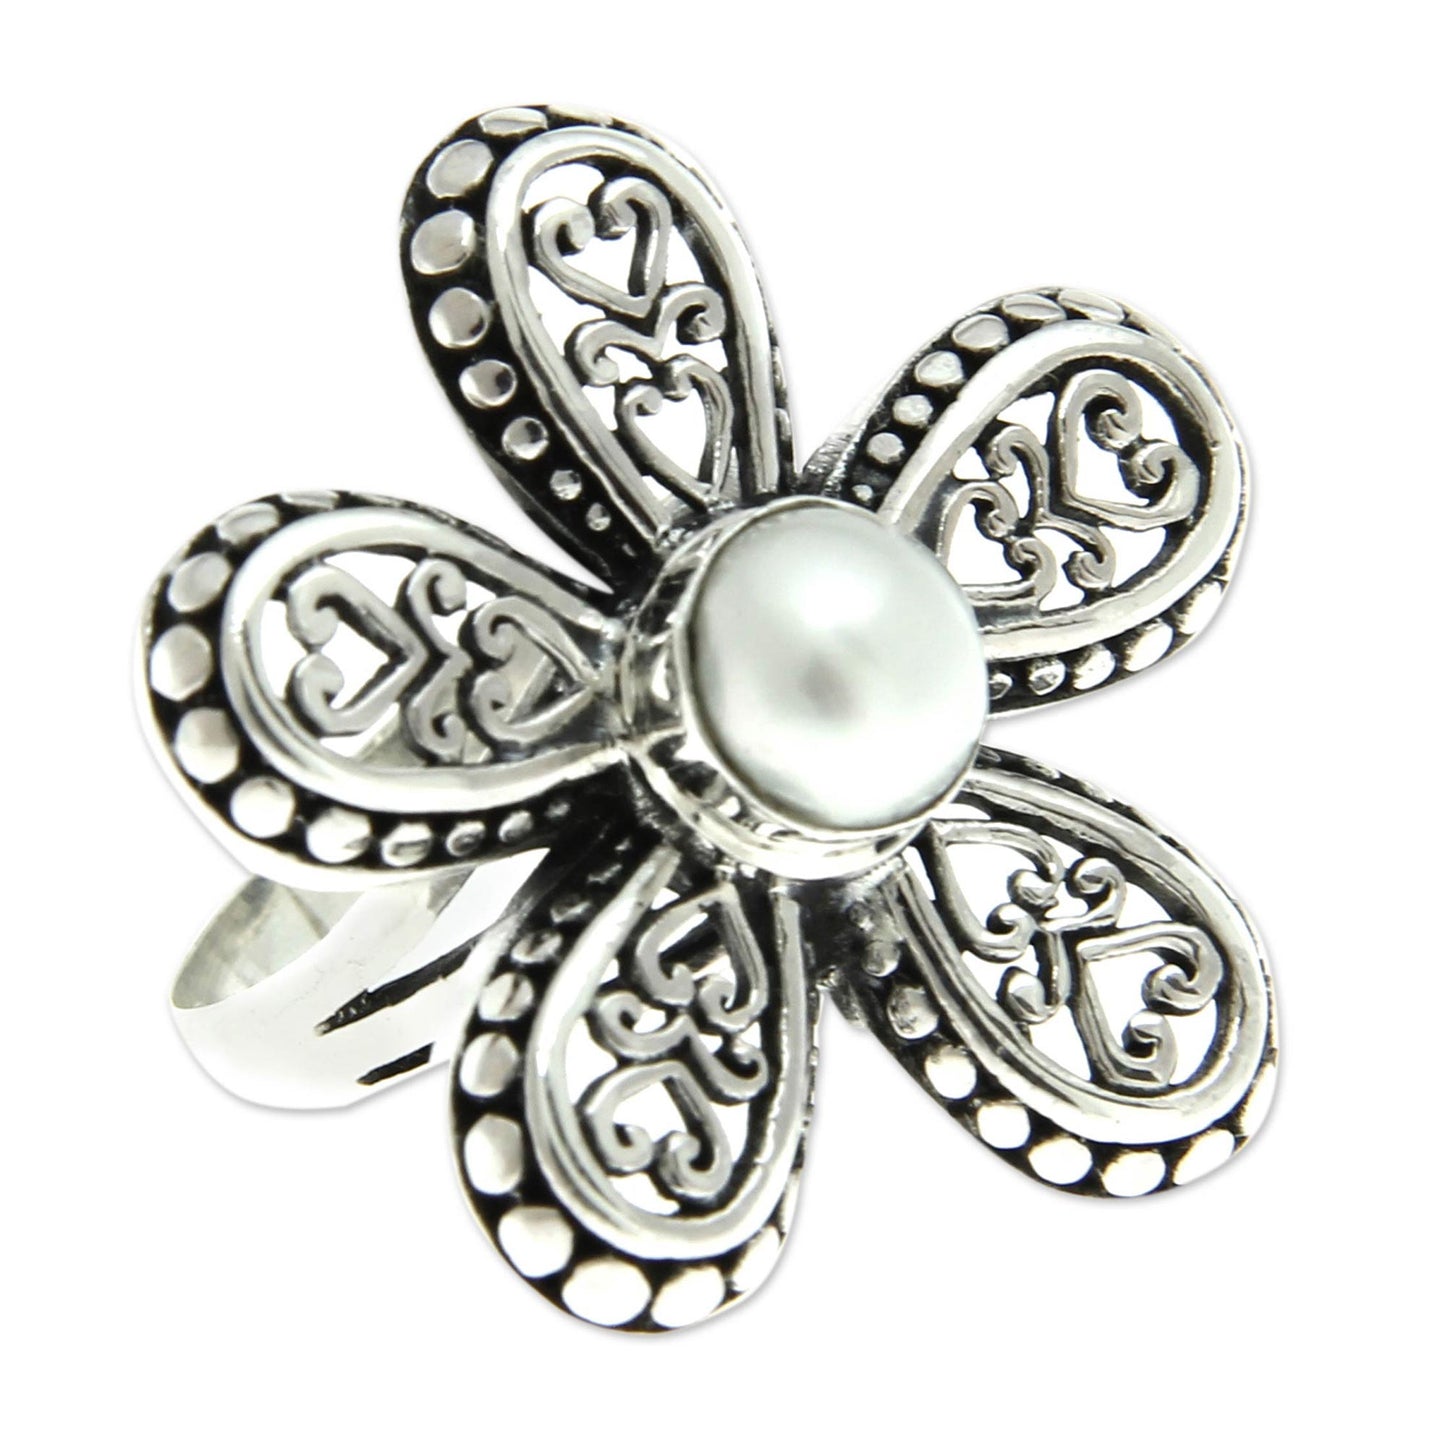 White Plumeria Women's Cultured Pearl and Silver 925 Flower Ring